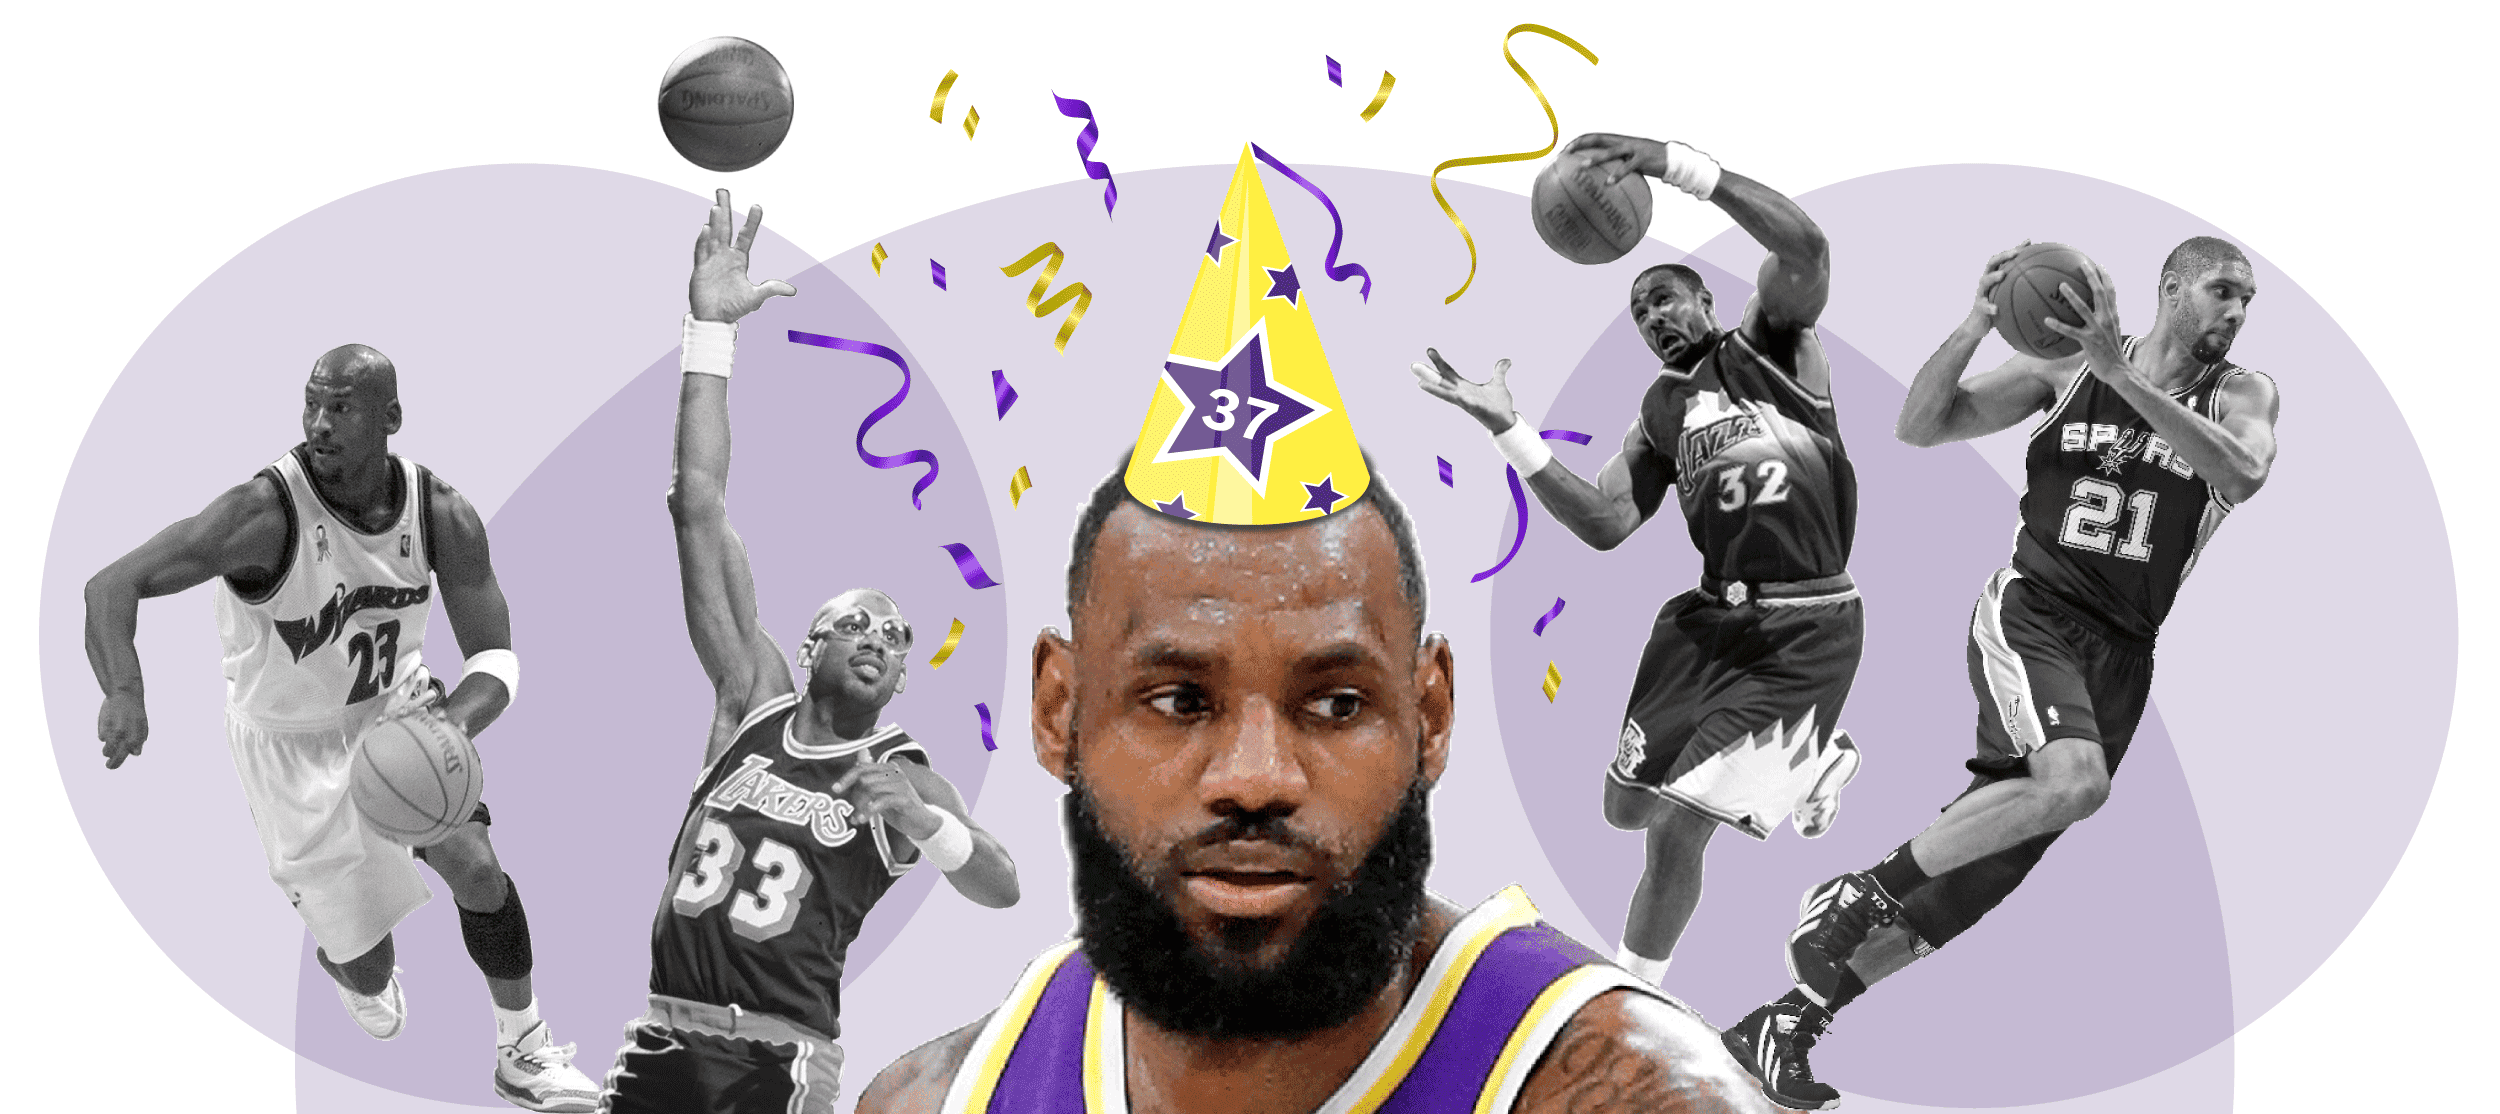 As he turns 37, the age-defying LeBron James is continuing to hold Father Time at bay thumbnail